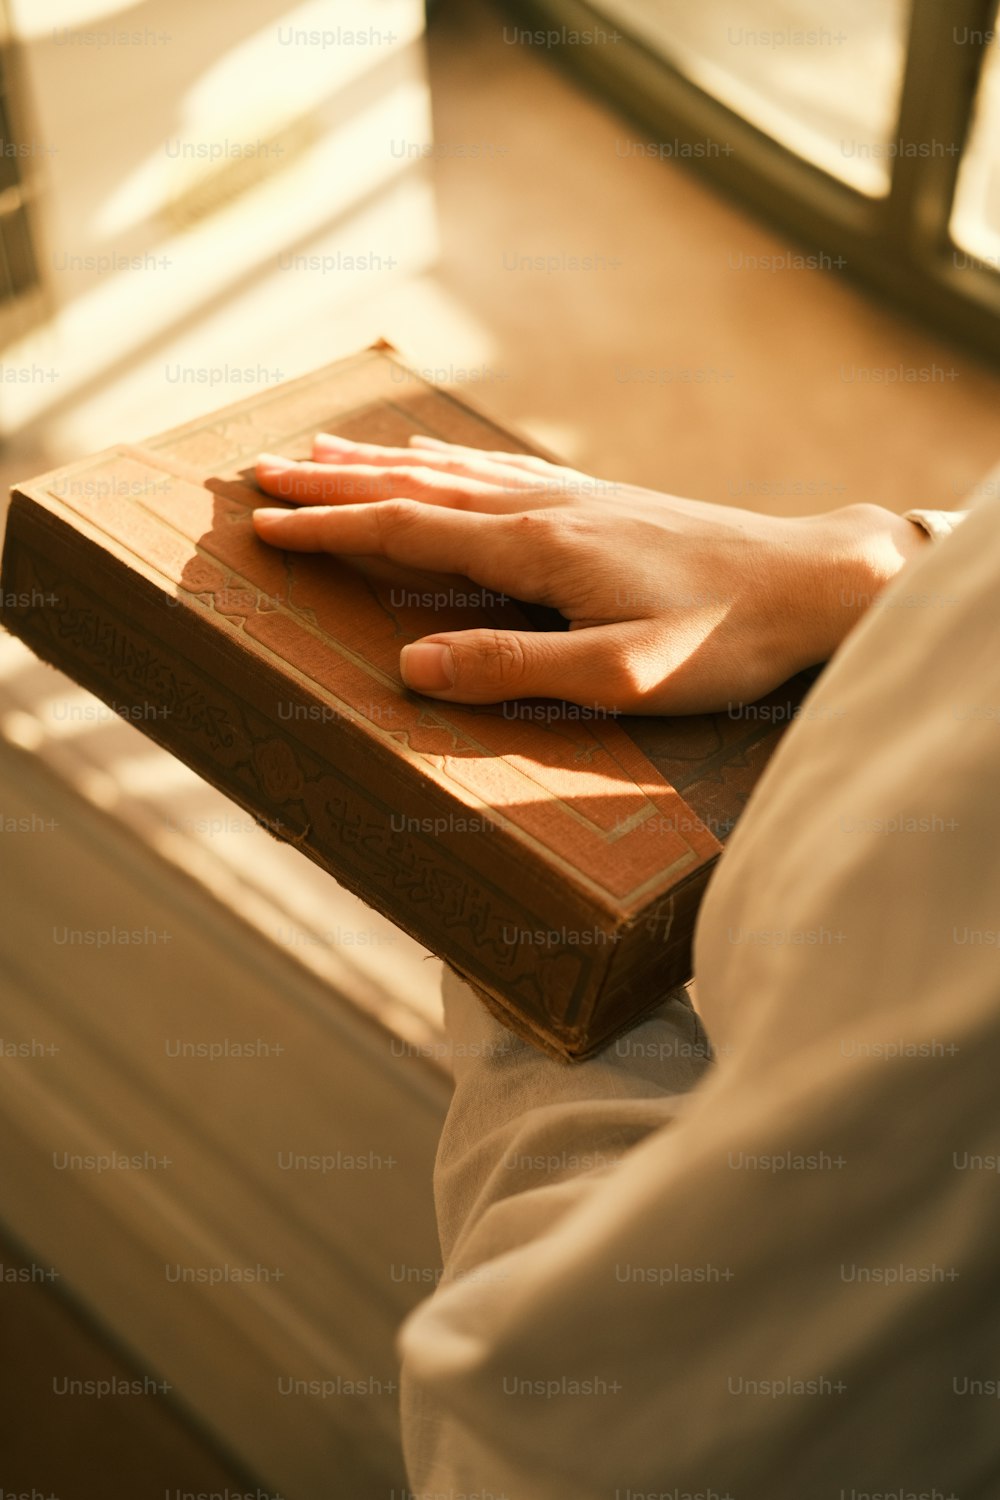 a person's hand resting on top of a book